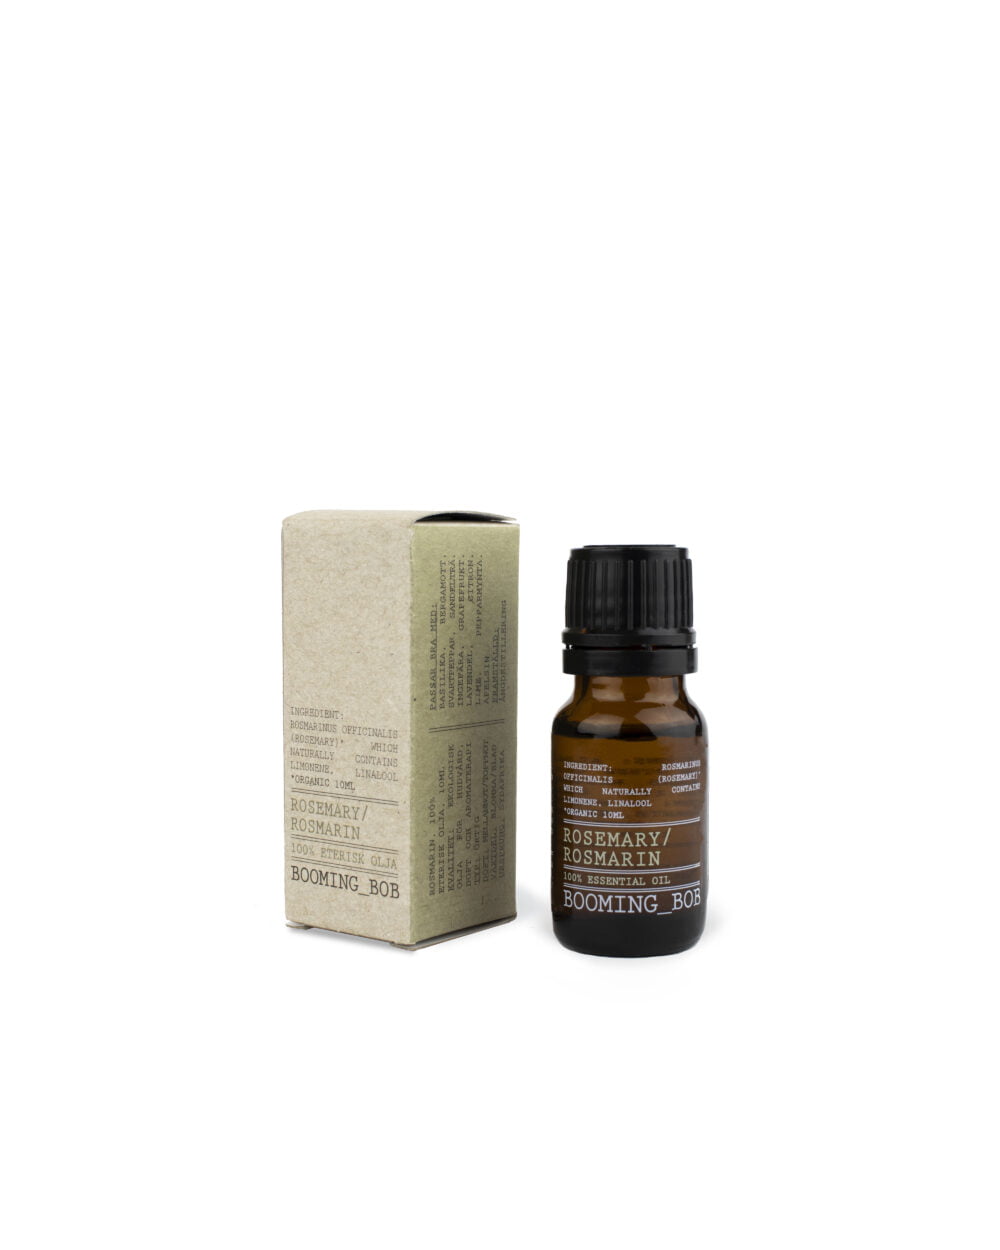 Booming Bob Essential Oil Rosemary